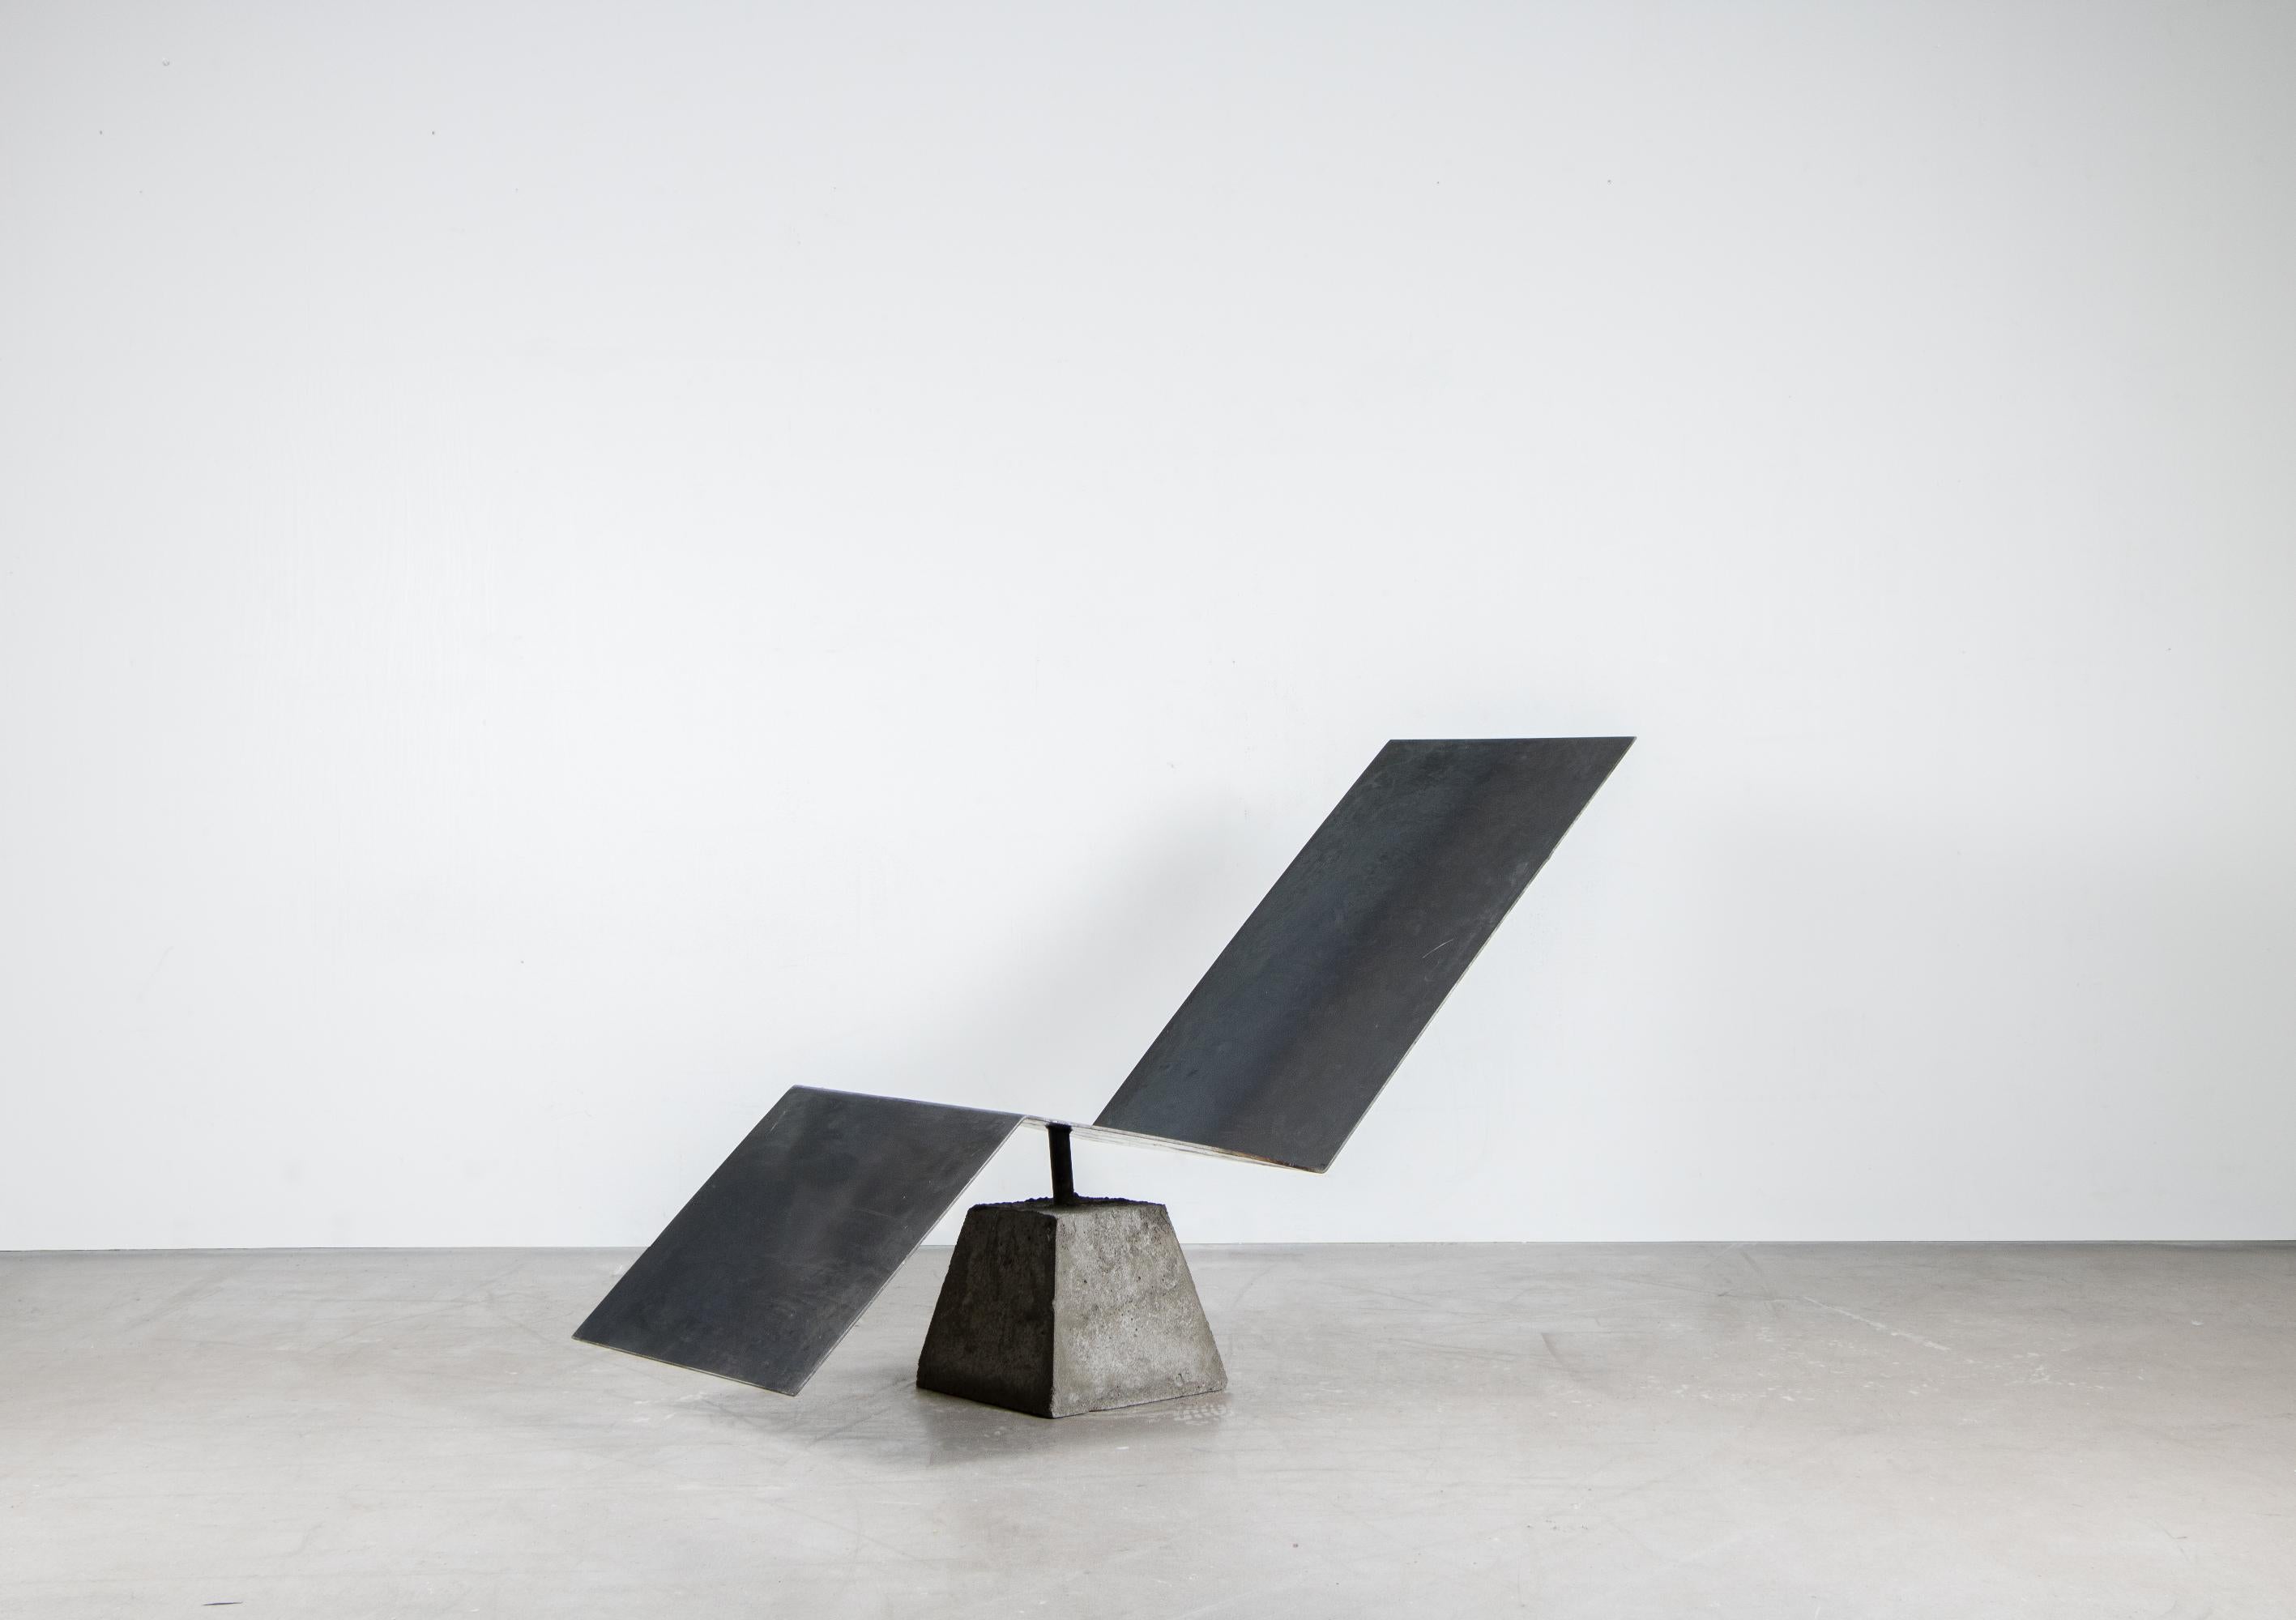 Flykt chair by Lucas Morten
2020
Limited edition of 17
Dimensions: 150 H, 83 W 50 cm
Material: Concrete, burned waxed steel and hand-waxed upholstered cushion

With the vision to build a monument for escapism, flykt chair was sculpted from a